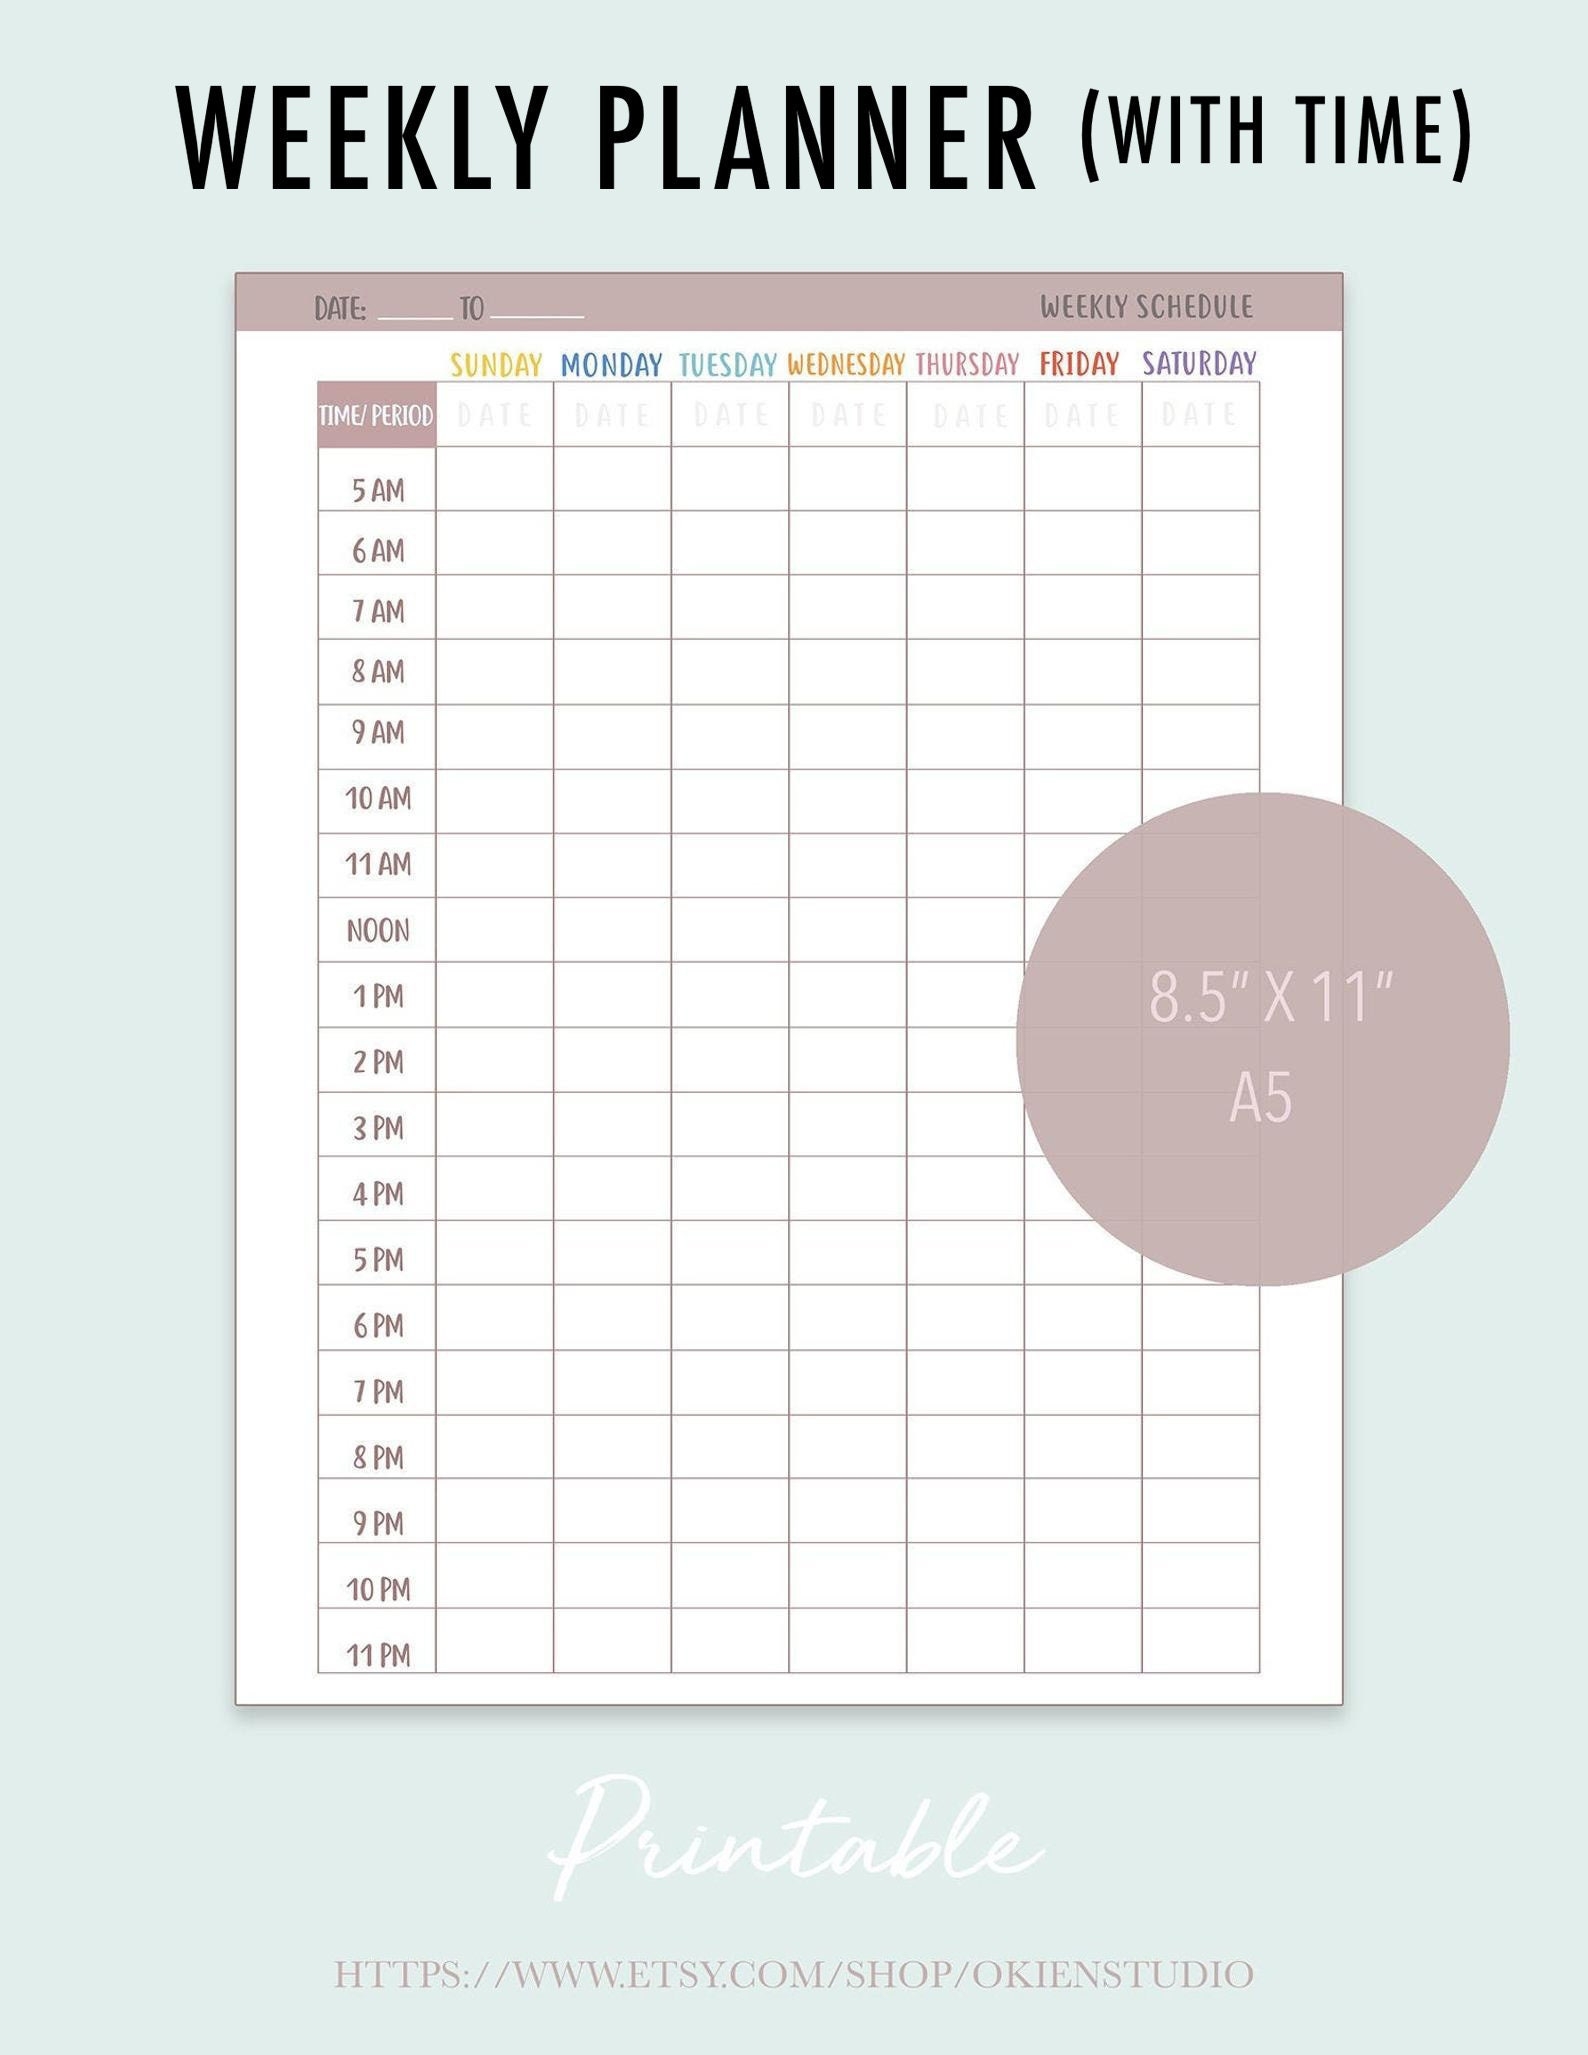 Printable Weekly Schedule With Time Slots